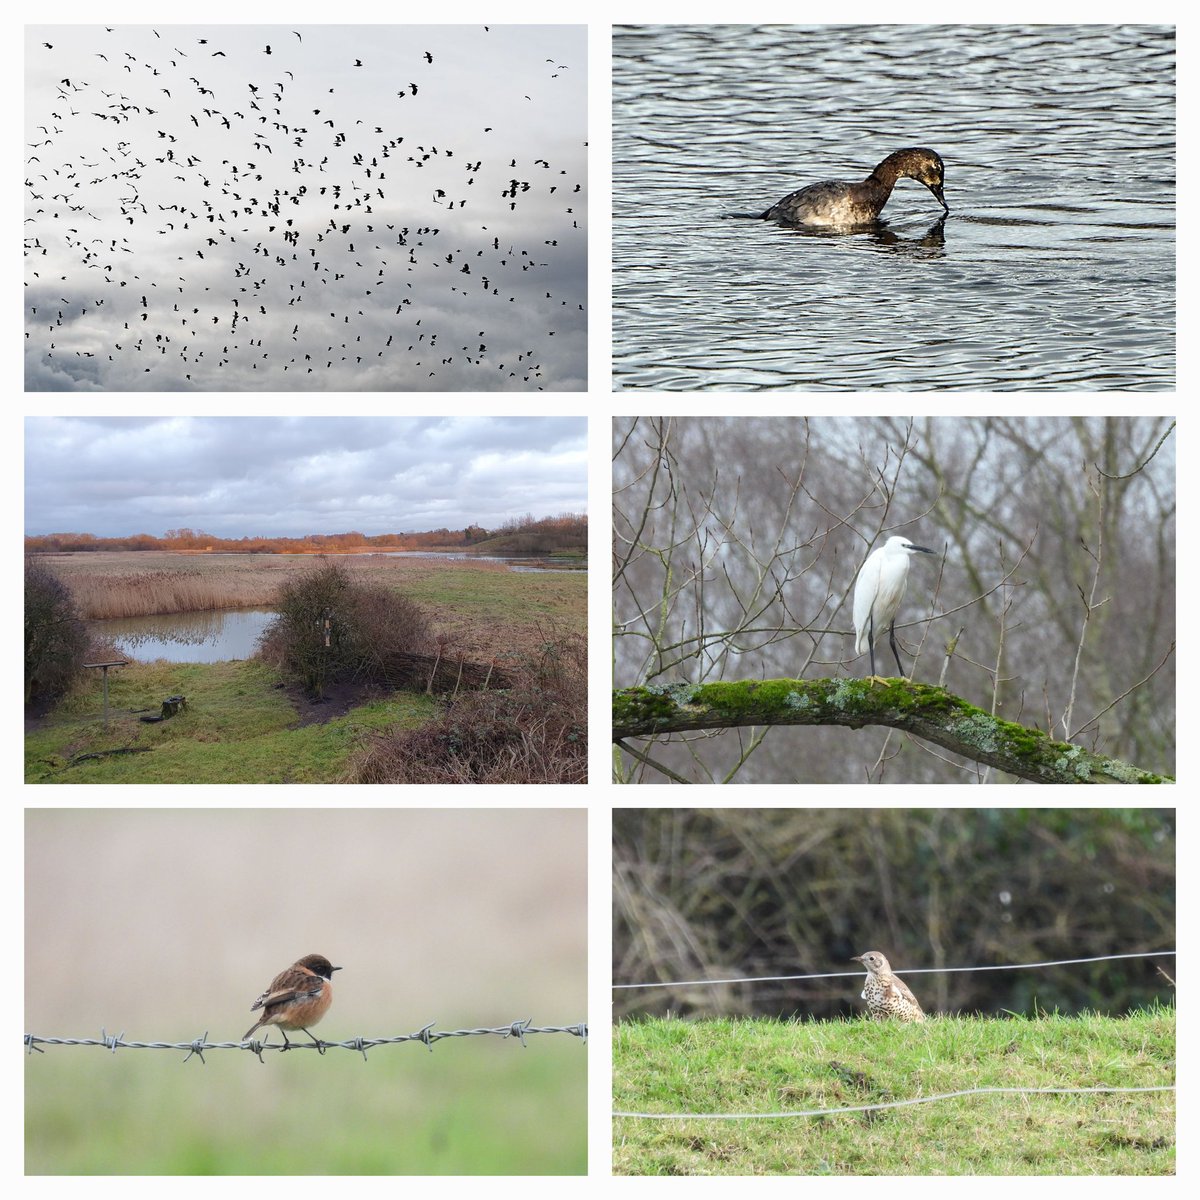 I can't fit all this week's bird news into a single tweet, so hope this helps!
@MercianBirding @WestMidsBirding